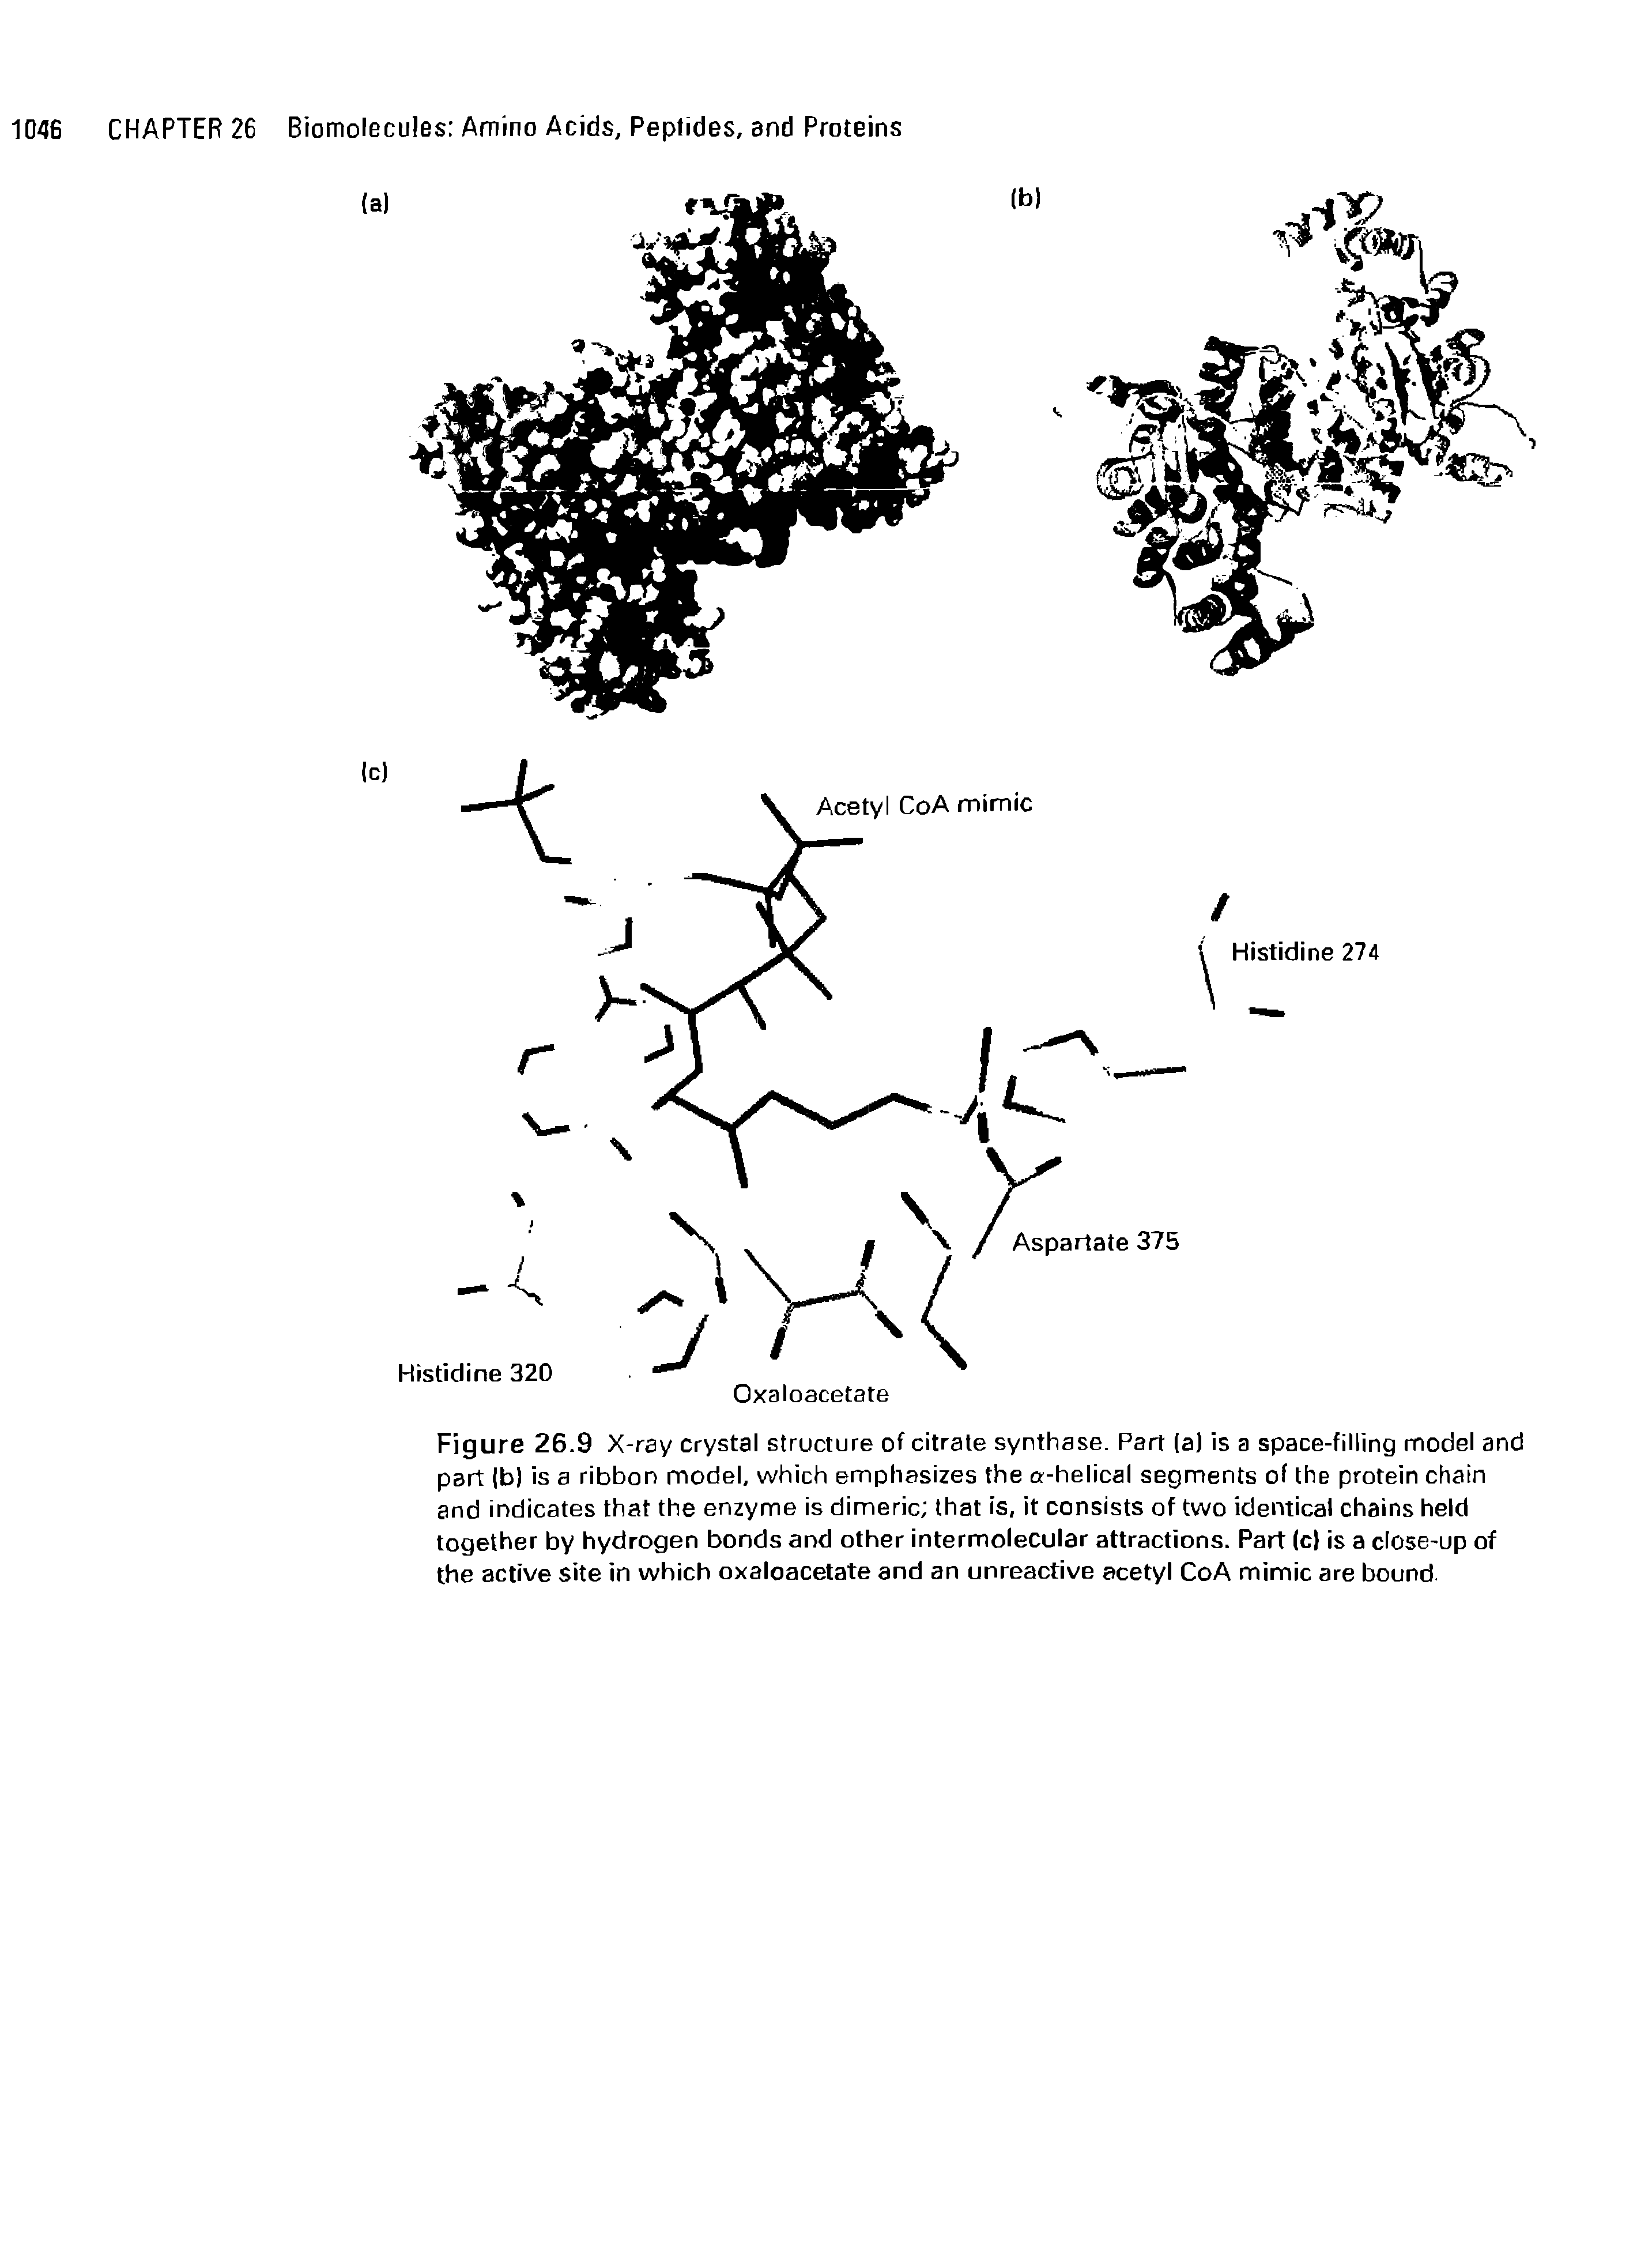 Figure 26.9 X-ray crystal structure of citrate synthase. Part (a) is a space-filling model and part (b) is a ribbon model, which emphasizes the a-helical segments of the protein chain and indicates that the enzyme is dimeric that is, it consists of two identical chains held together by hydrogen bonds and other intermolecular attractions. Part (cl is a close-up of the active site in which oxaloacetate and an unreactive acetyl CoA mimic are bound.